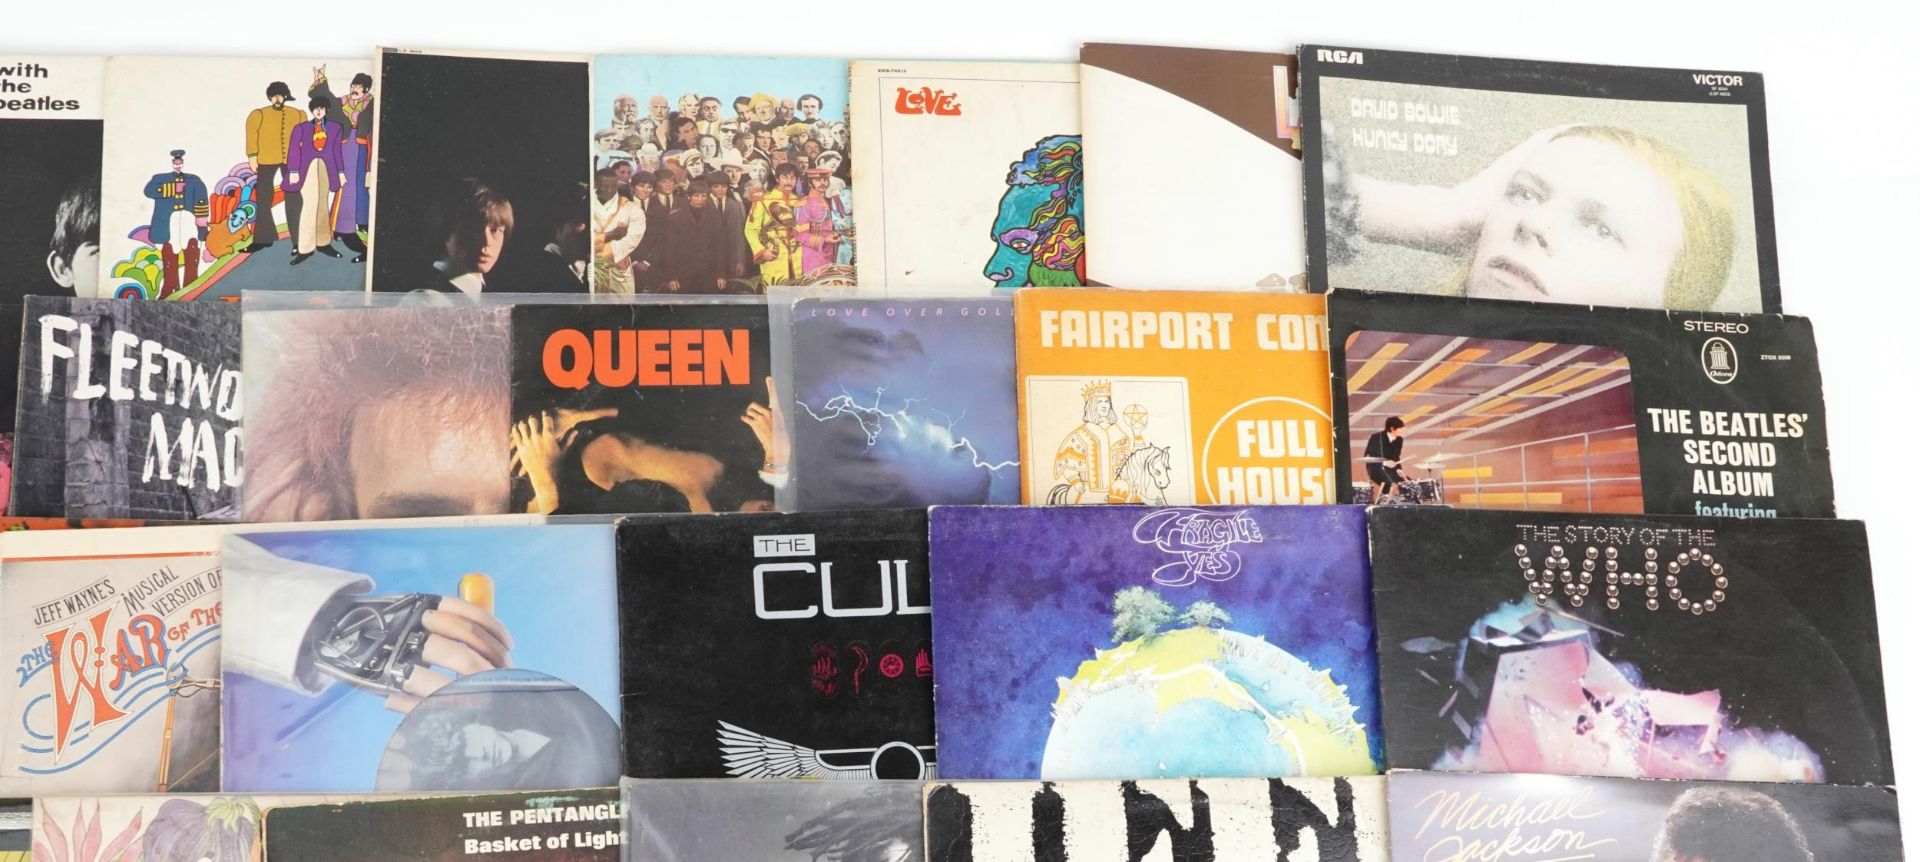 Vinyl LP records including Cream, The Rolling Stones, The Beatles, Love, David Bowie, Dire Straits - Image 3 of 5